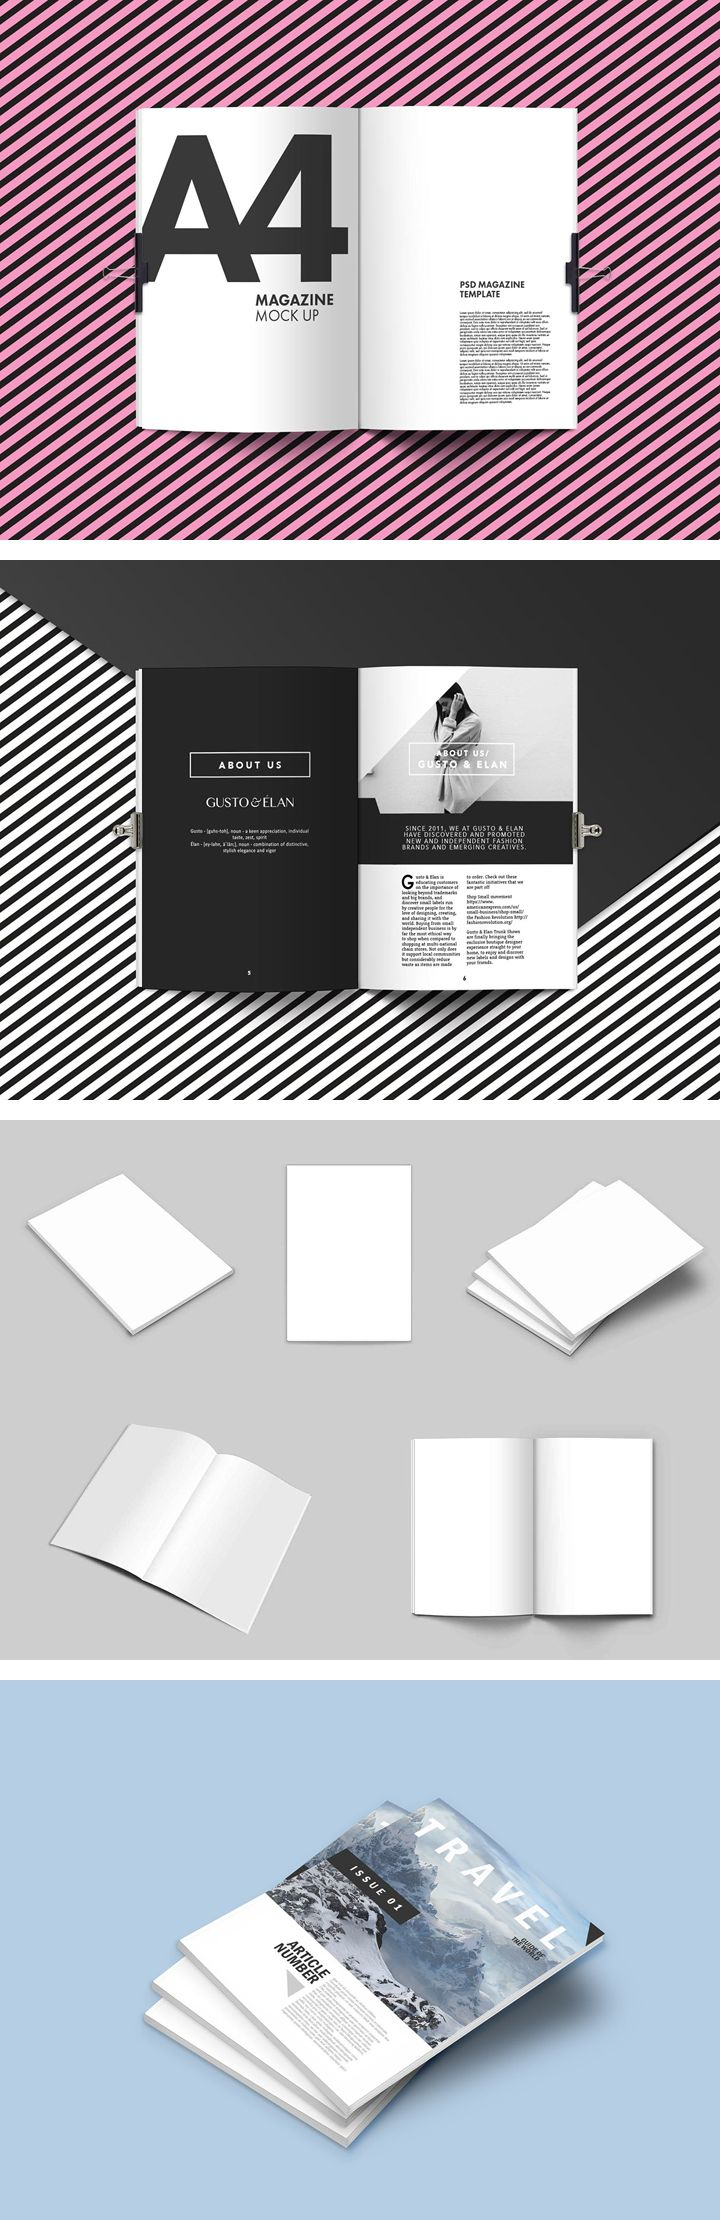 Magazine Mockups | Free: Design Elements Intended For Blank Magazine Template Psd